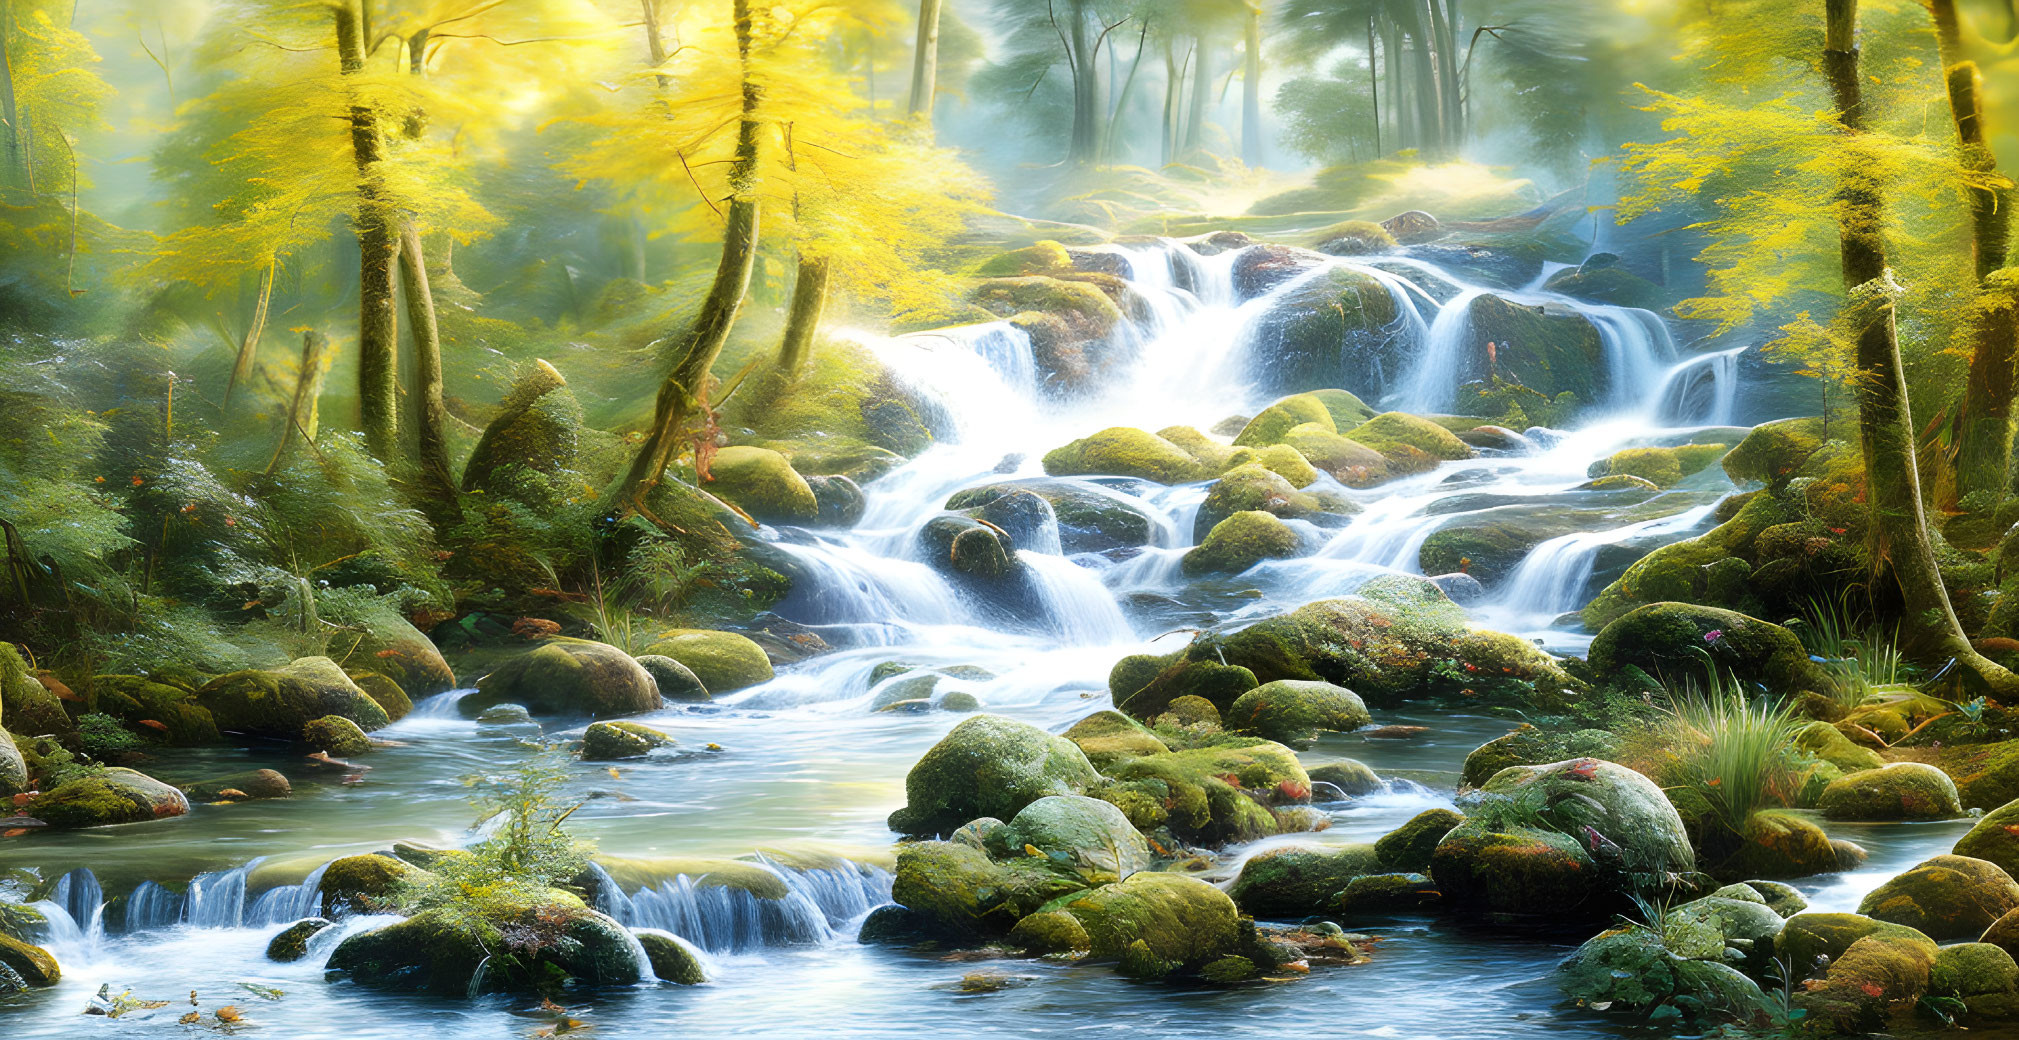 Tranquil waterfall in misty forest with golden trees